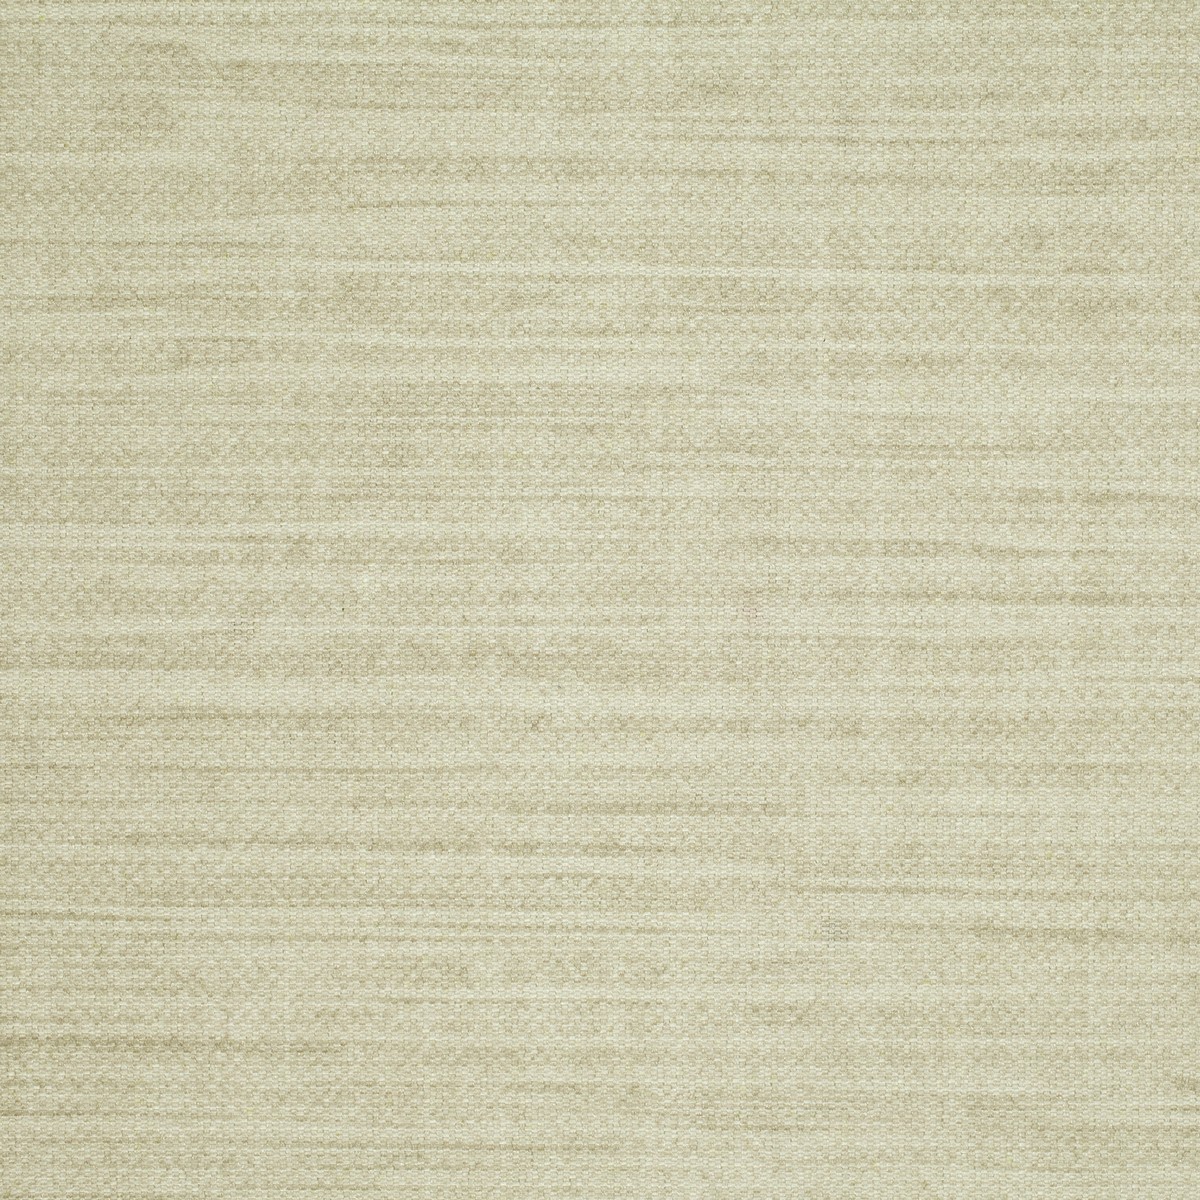 Safi Oatmeal Fabric by Harlequin